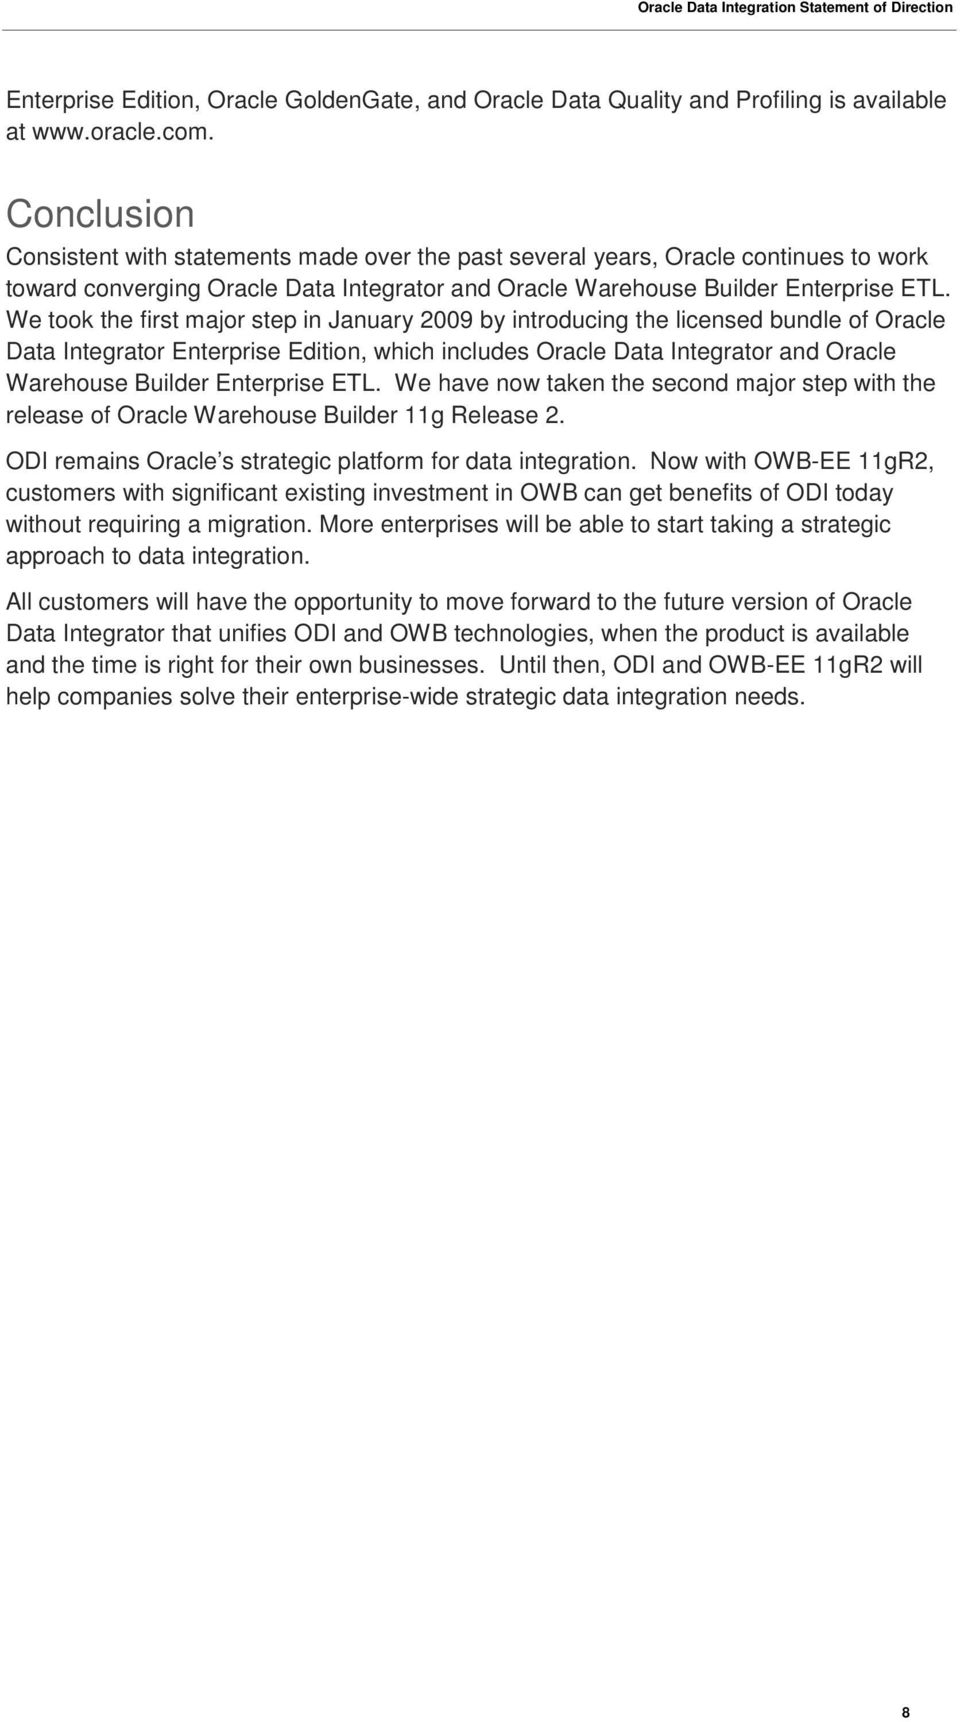 We took the first major step in January 2009 by introducing the licensed bundle of Oracle Data Integrator Enterprise Edition, which includes Oracle Data Integrator and Oracle Warehouse Builder